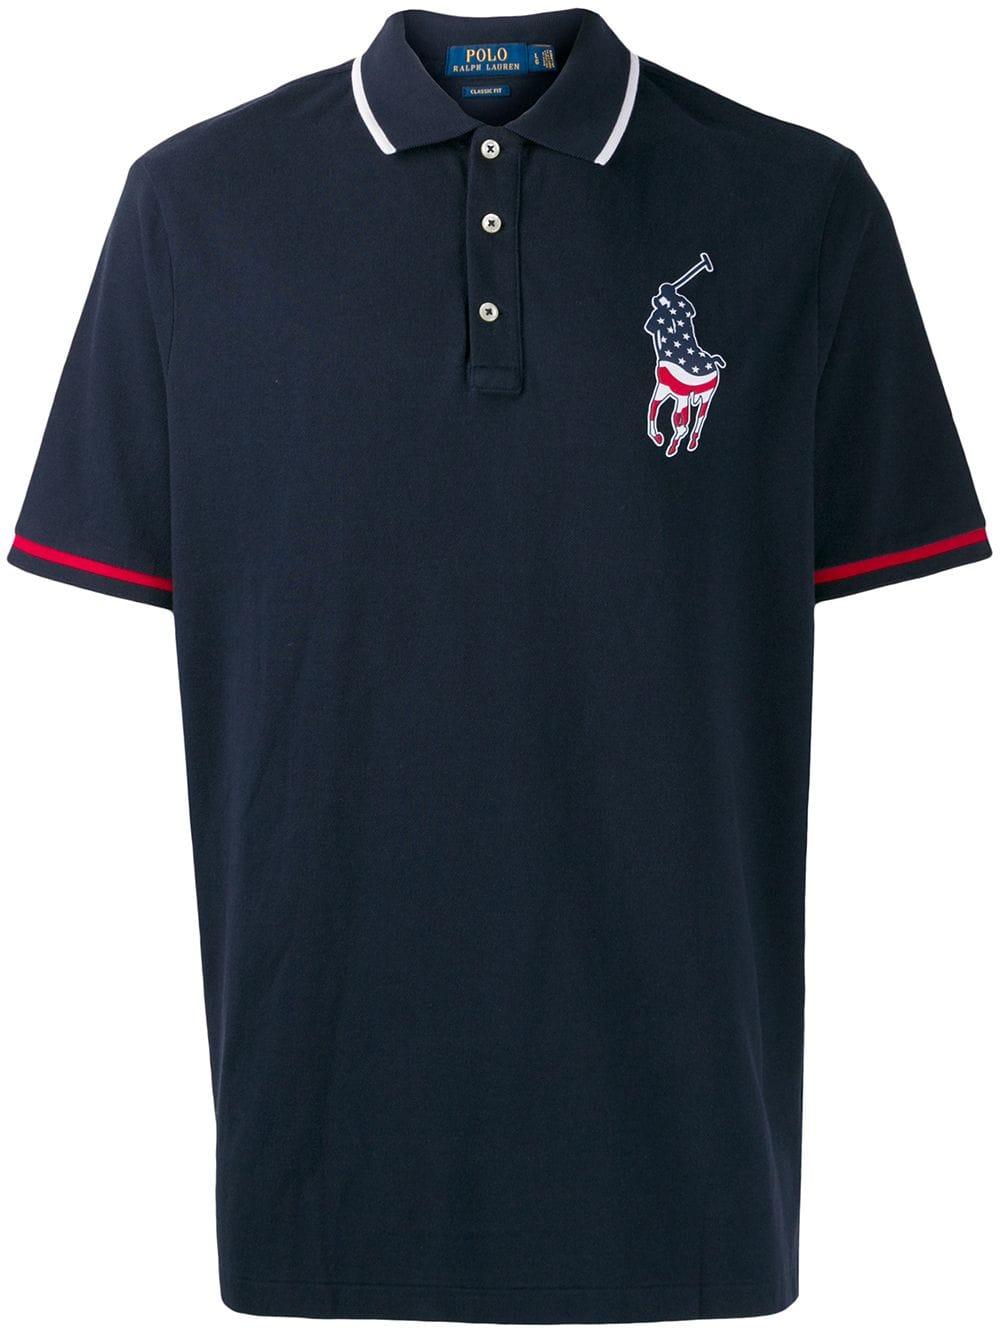 Polo Ralph Lauren Cotton American Flag Pony Polo Shirt in Navy (Blue) for  Men - Lyst